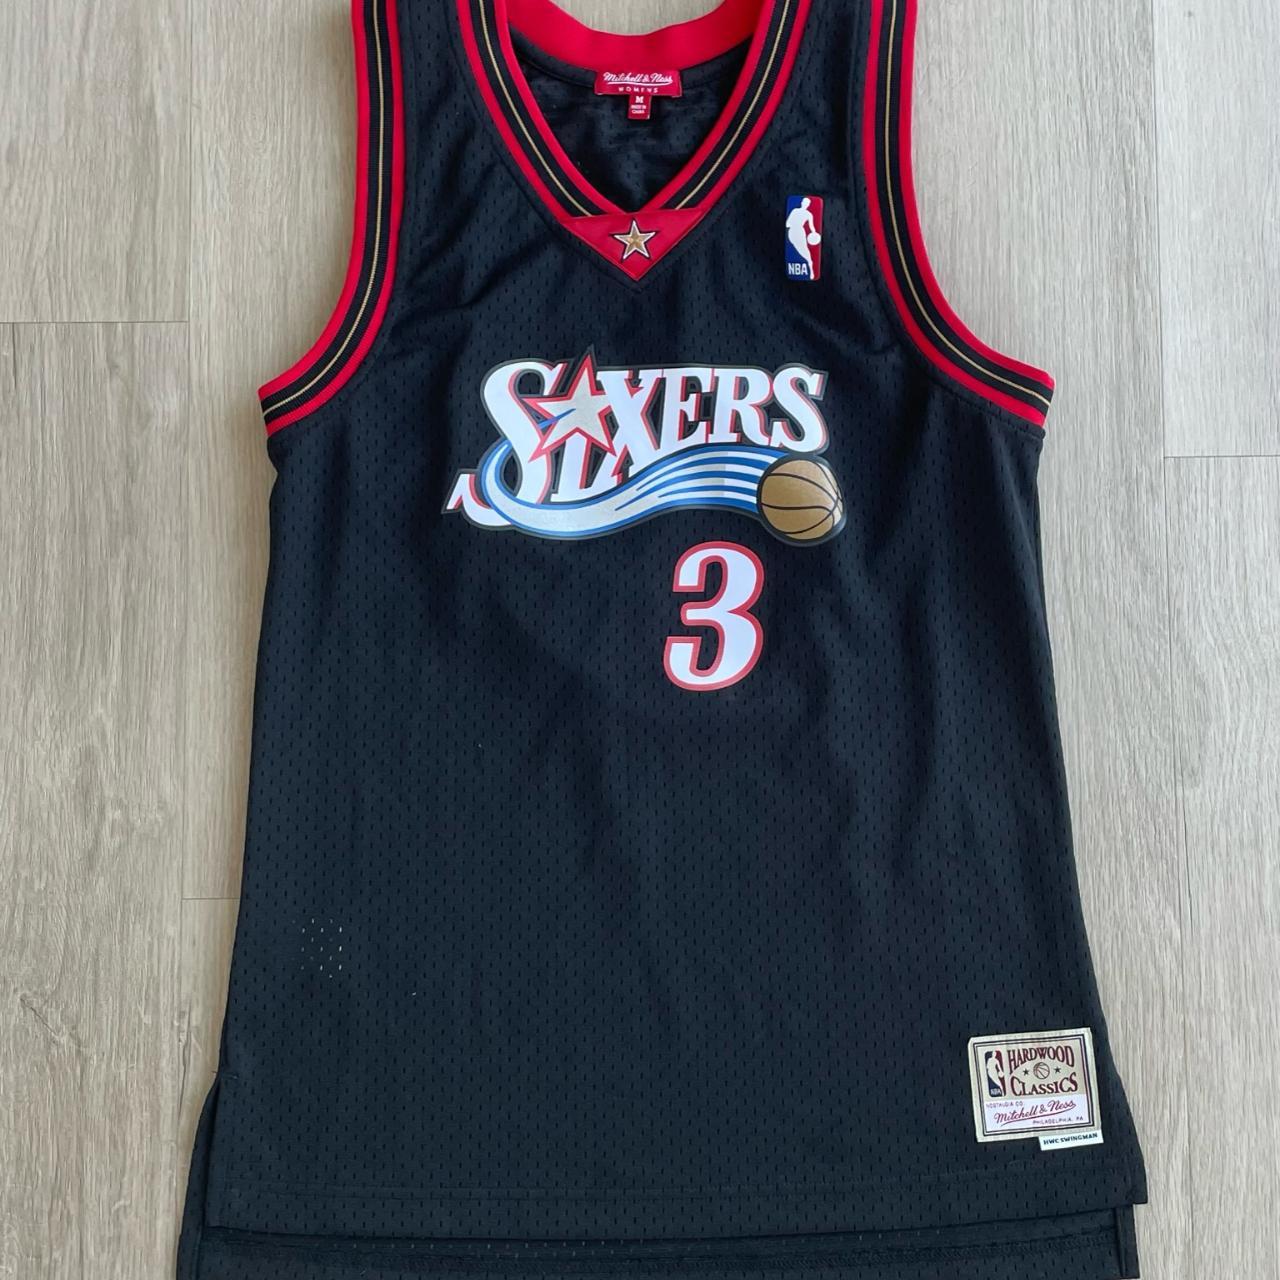 Allen Iverson 76ers Jersey Very high quality you - Depop